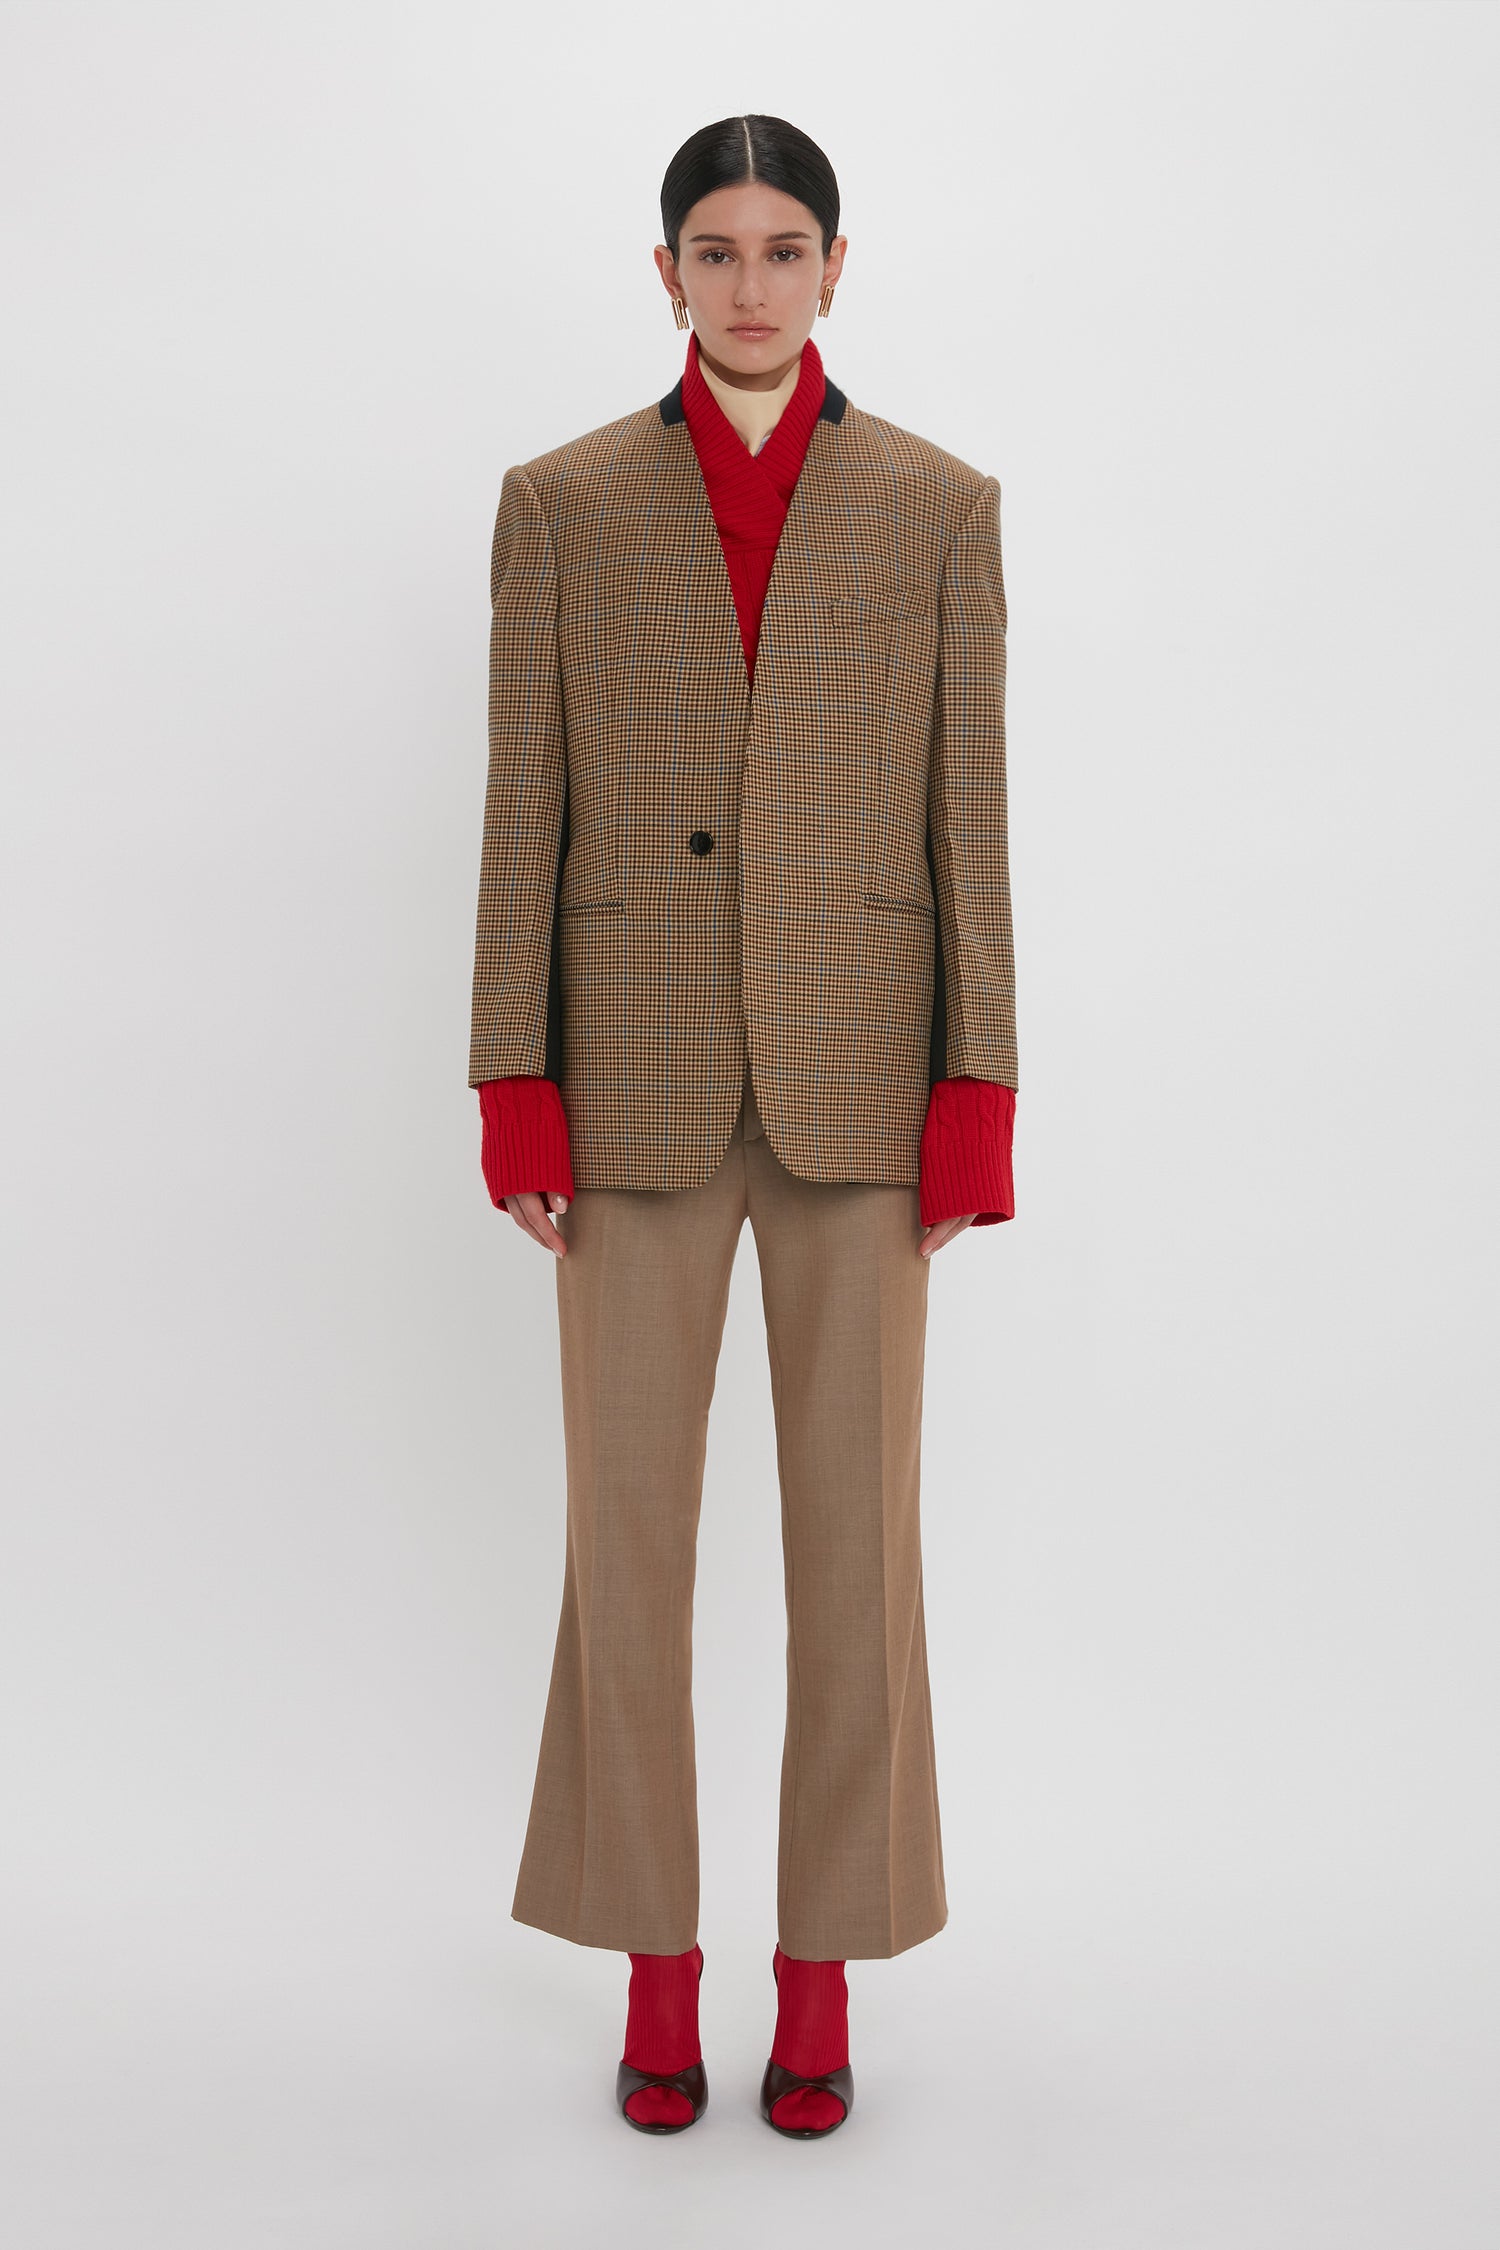 A person stands against a plain background wearing the Victoria Beckham Pocket Detail Collarless Jacket In Tobacco with a modern oversized fit, matching pants, a red turtleneck sweater, and red shoes.